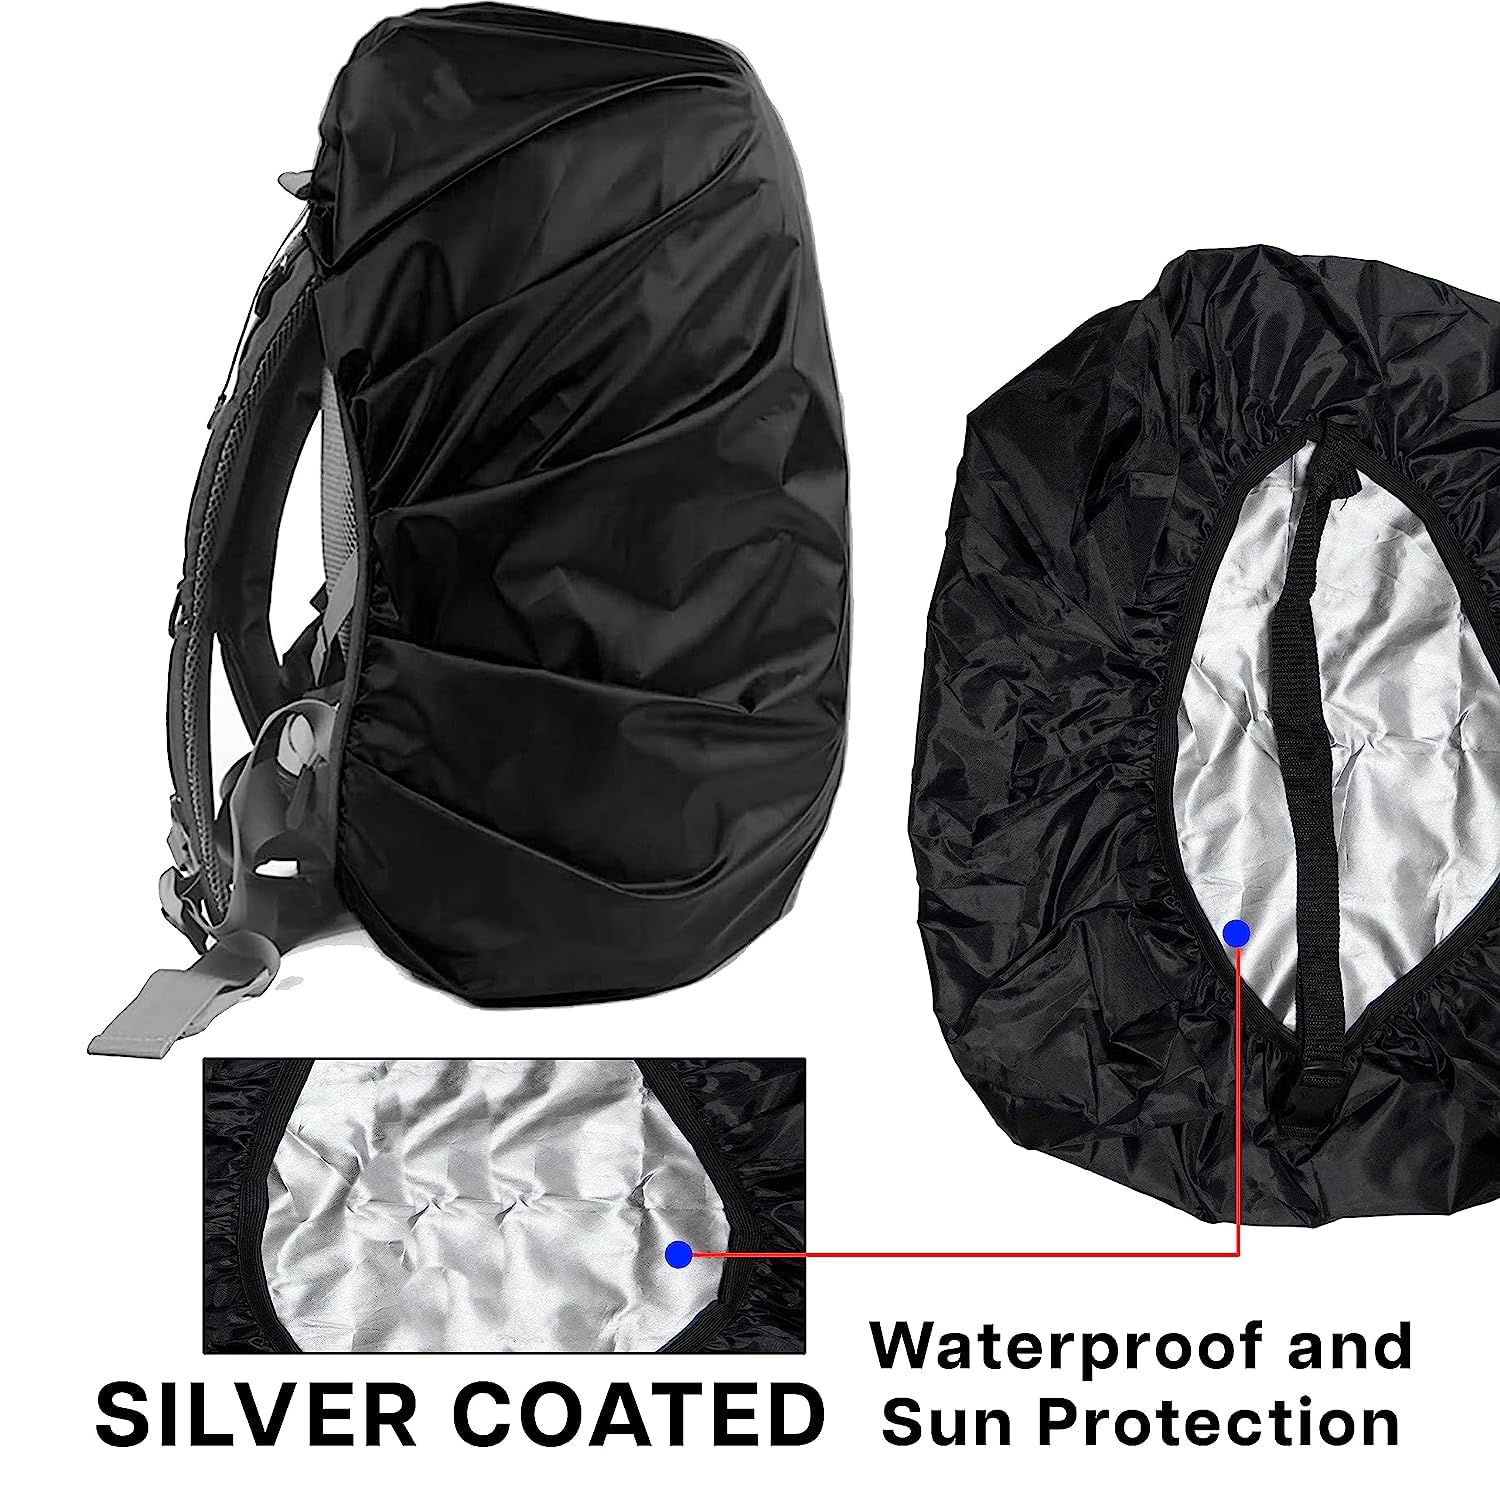 Reflective Waterproof Rucksack Covers - Essential Travel Accessories for Outdoor Bicycling, Hiking, Camping, and Traveling Pack Cover (30-60L)